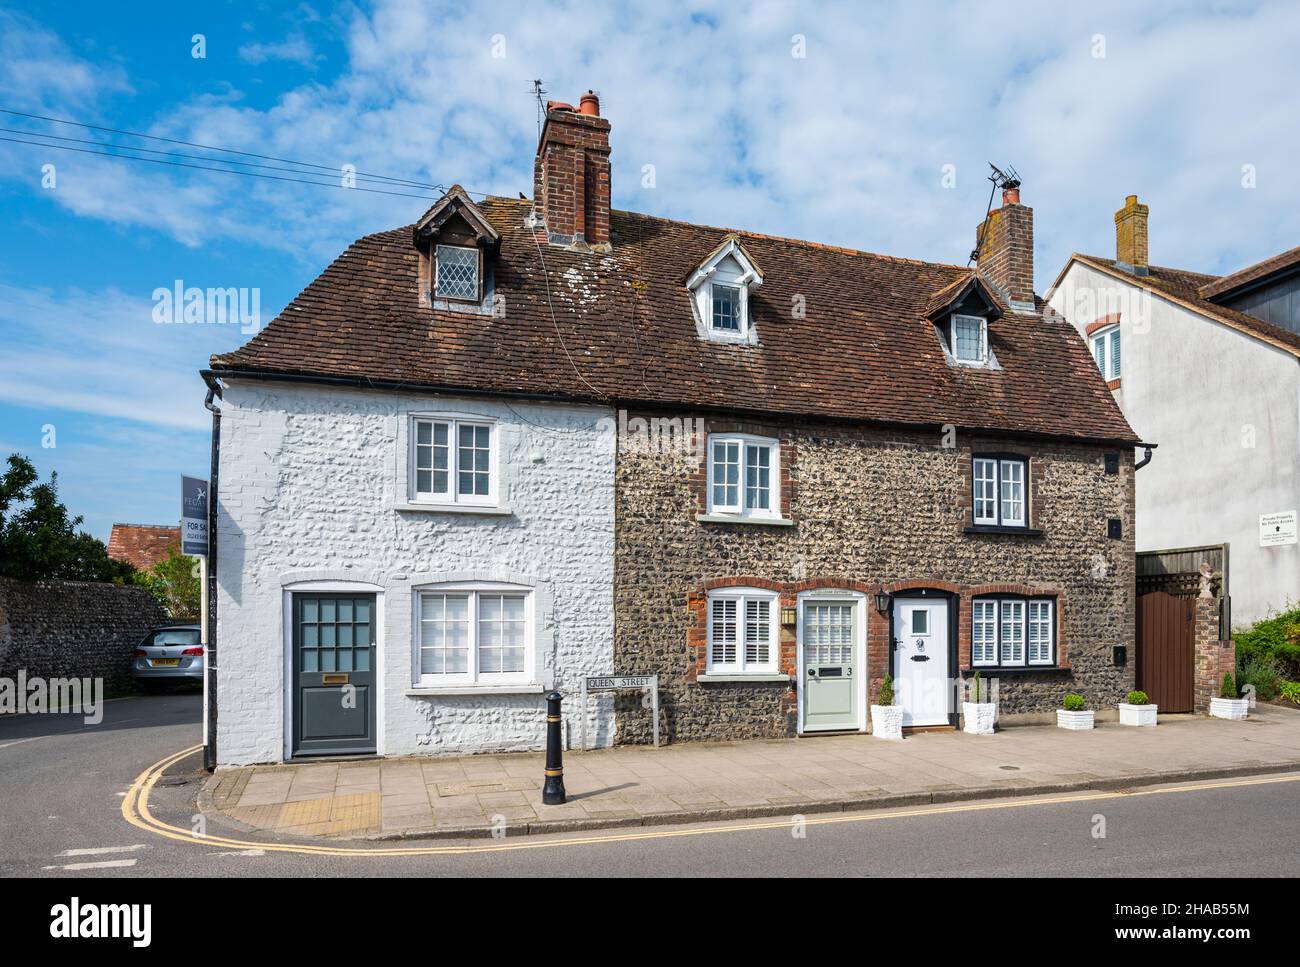 Early 19th century Grade II Listed terraced cottages with nodular flint walls & attic rooms with dormer windows in Arundel, West Sussex, England, UK. Stock Photo